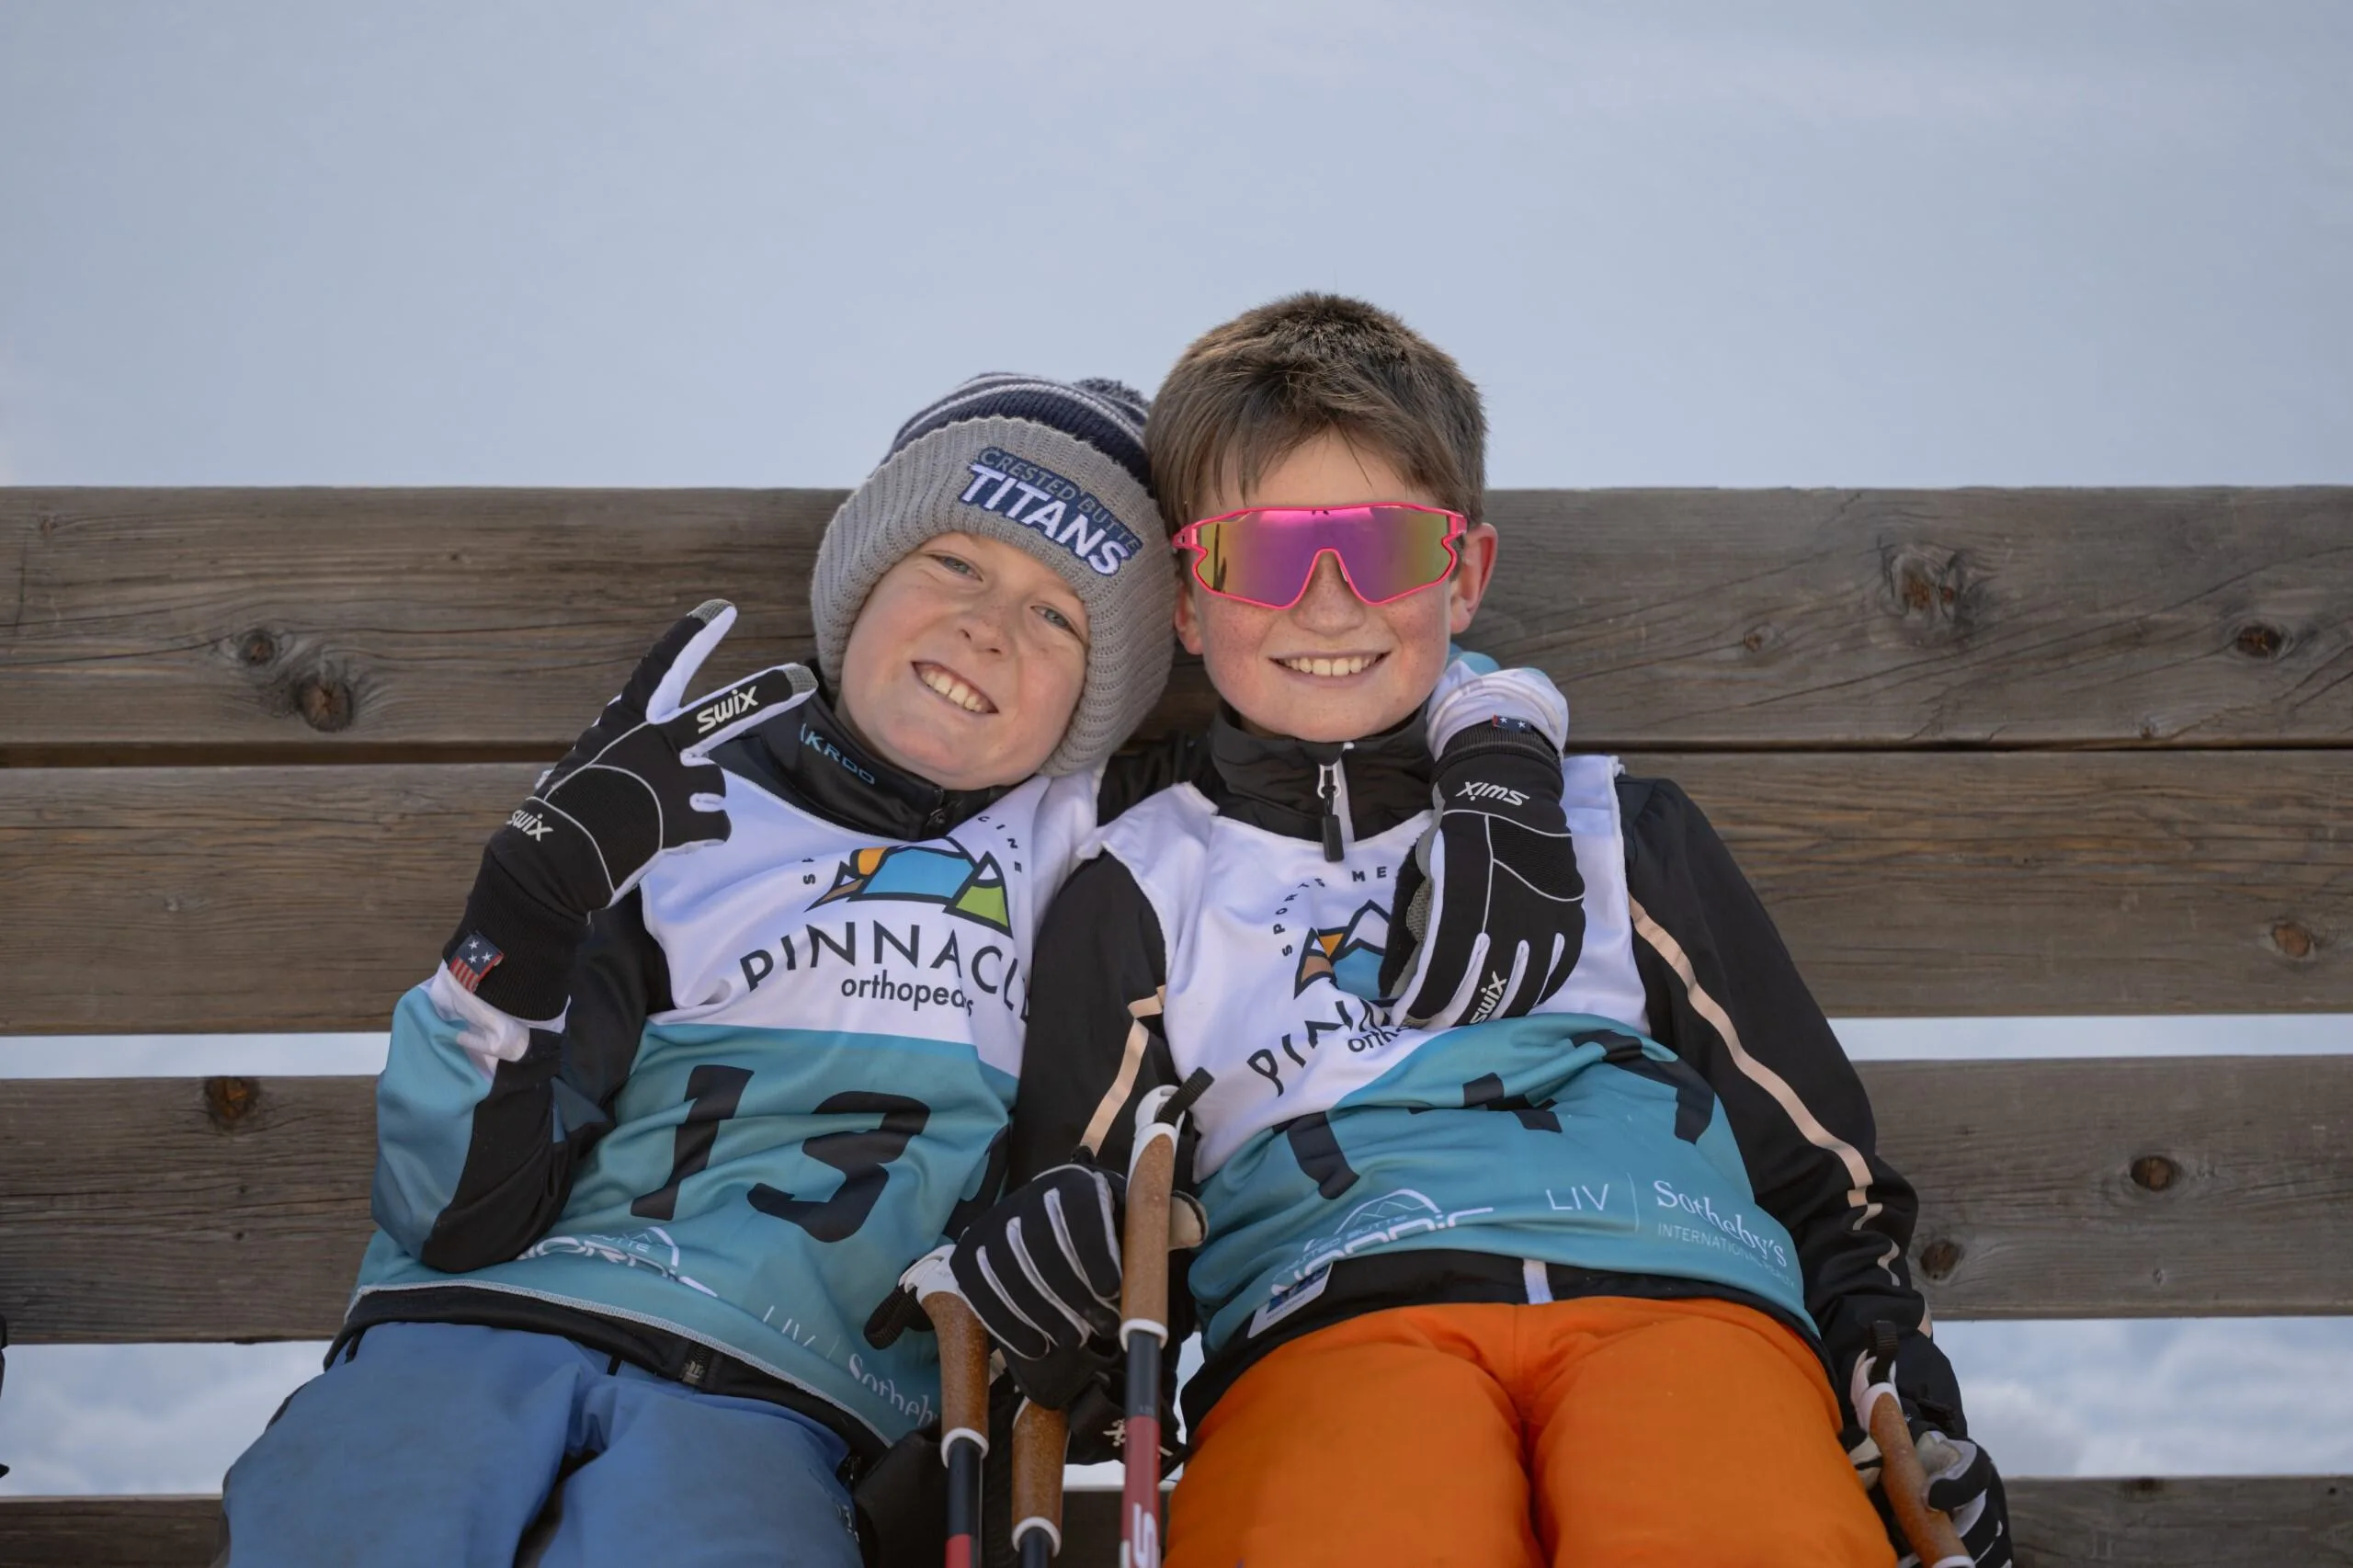 CB Nordic kids enjoy the bench after a hard race.